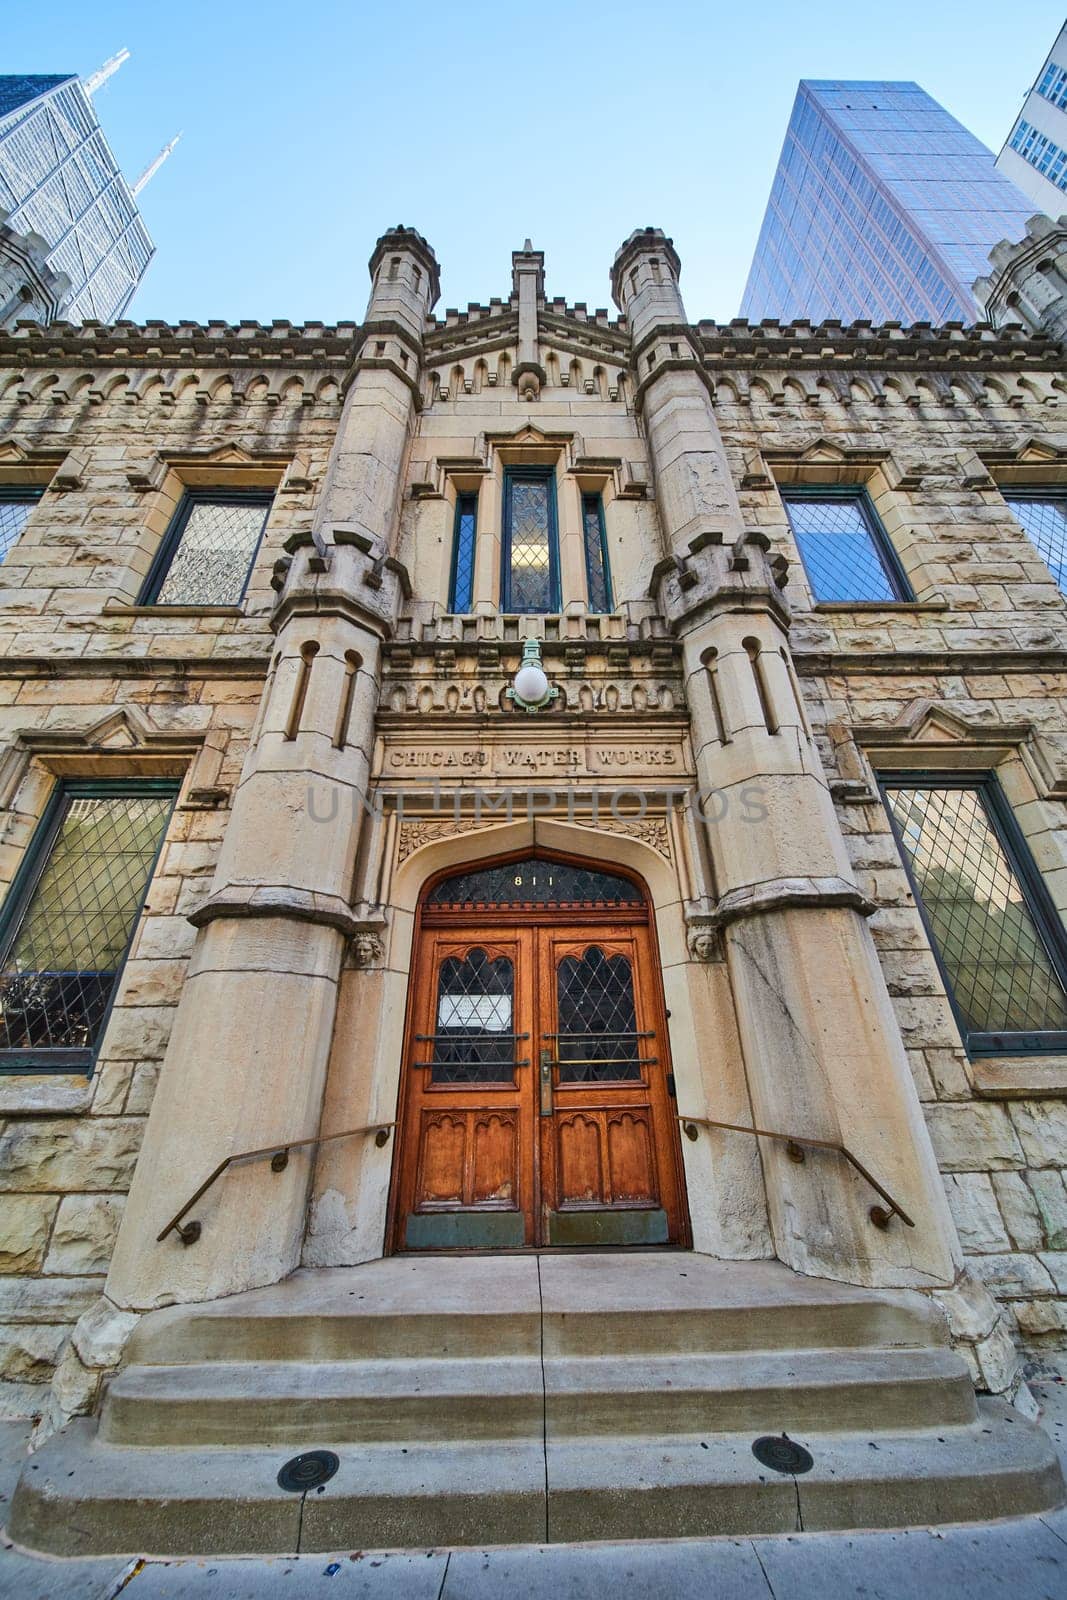 Image of Entrance Chicago Water Works castle like building architecture with steps and city skyscrapers